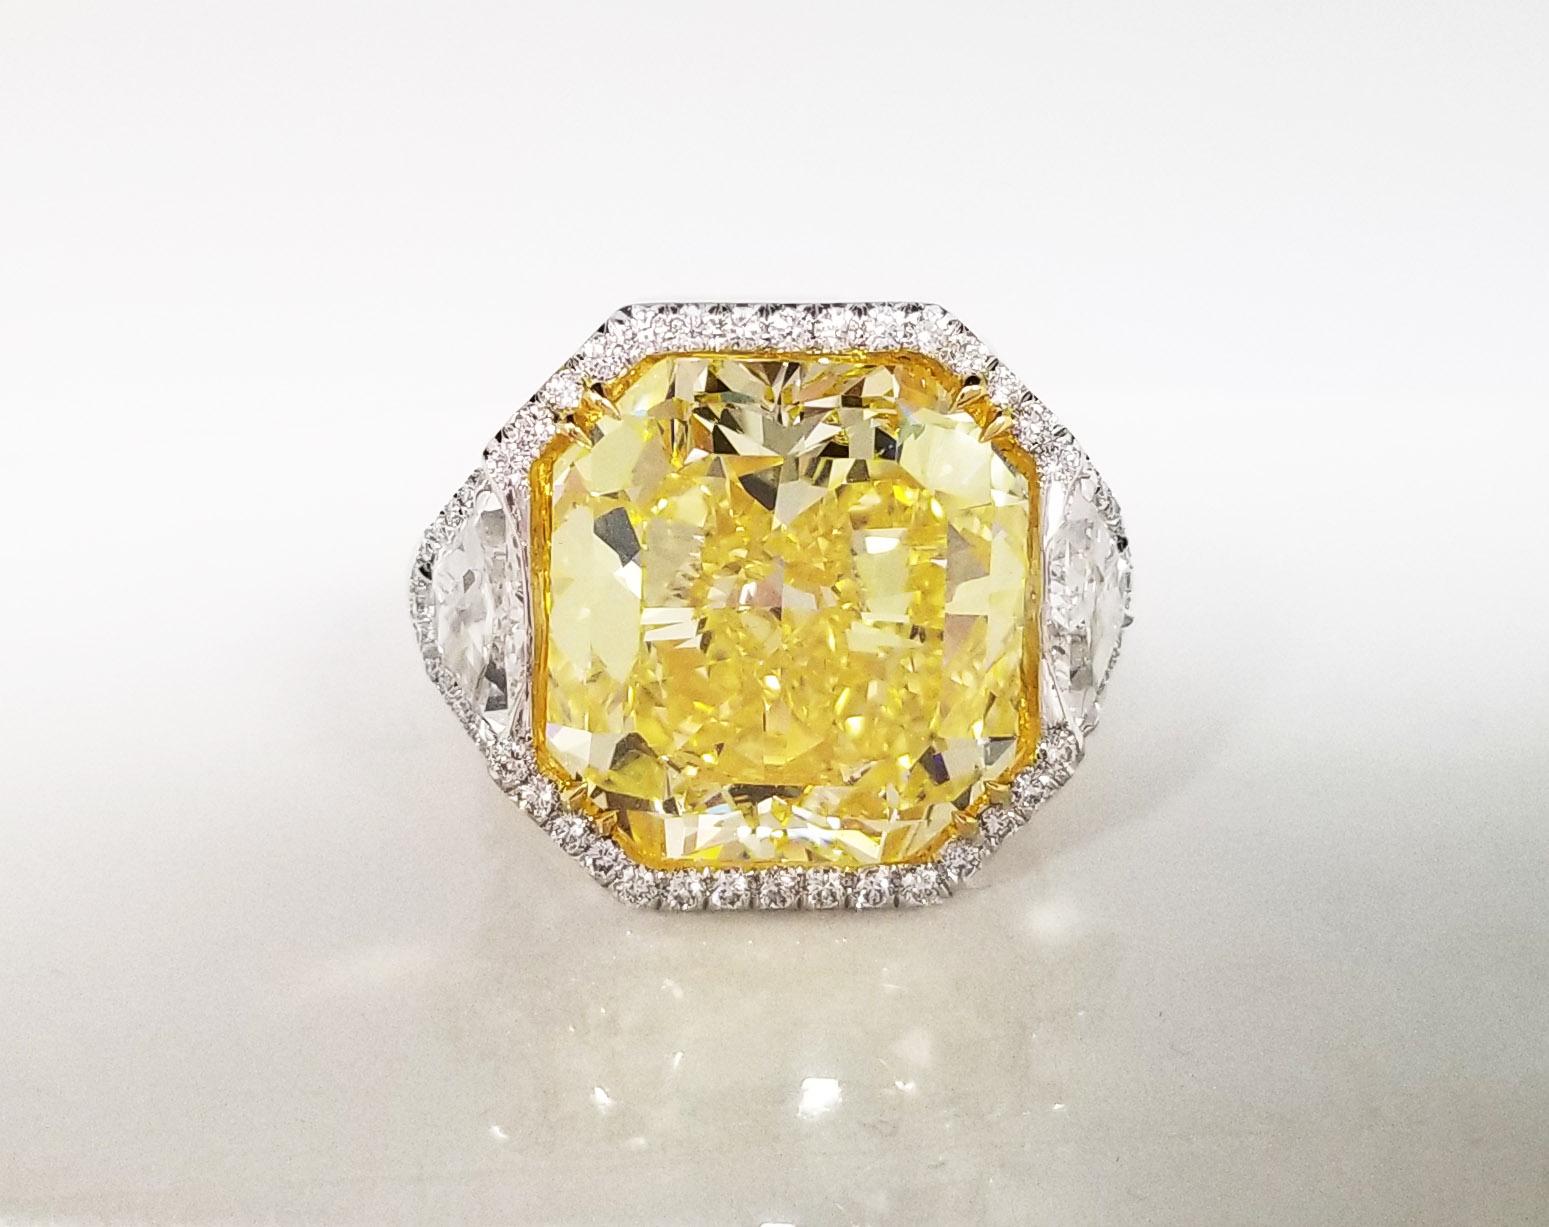 Radiant Cut SCARSELLI 20 Carat Fancy Vivid Yellow Natural Diamond Ring GIA For Sale